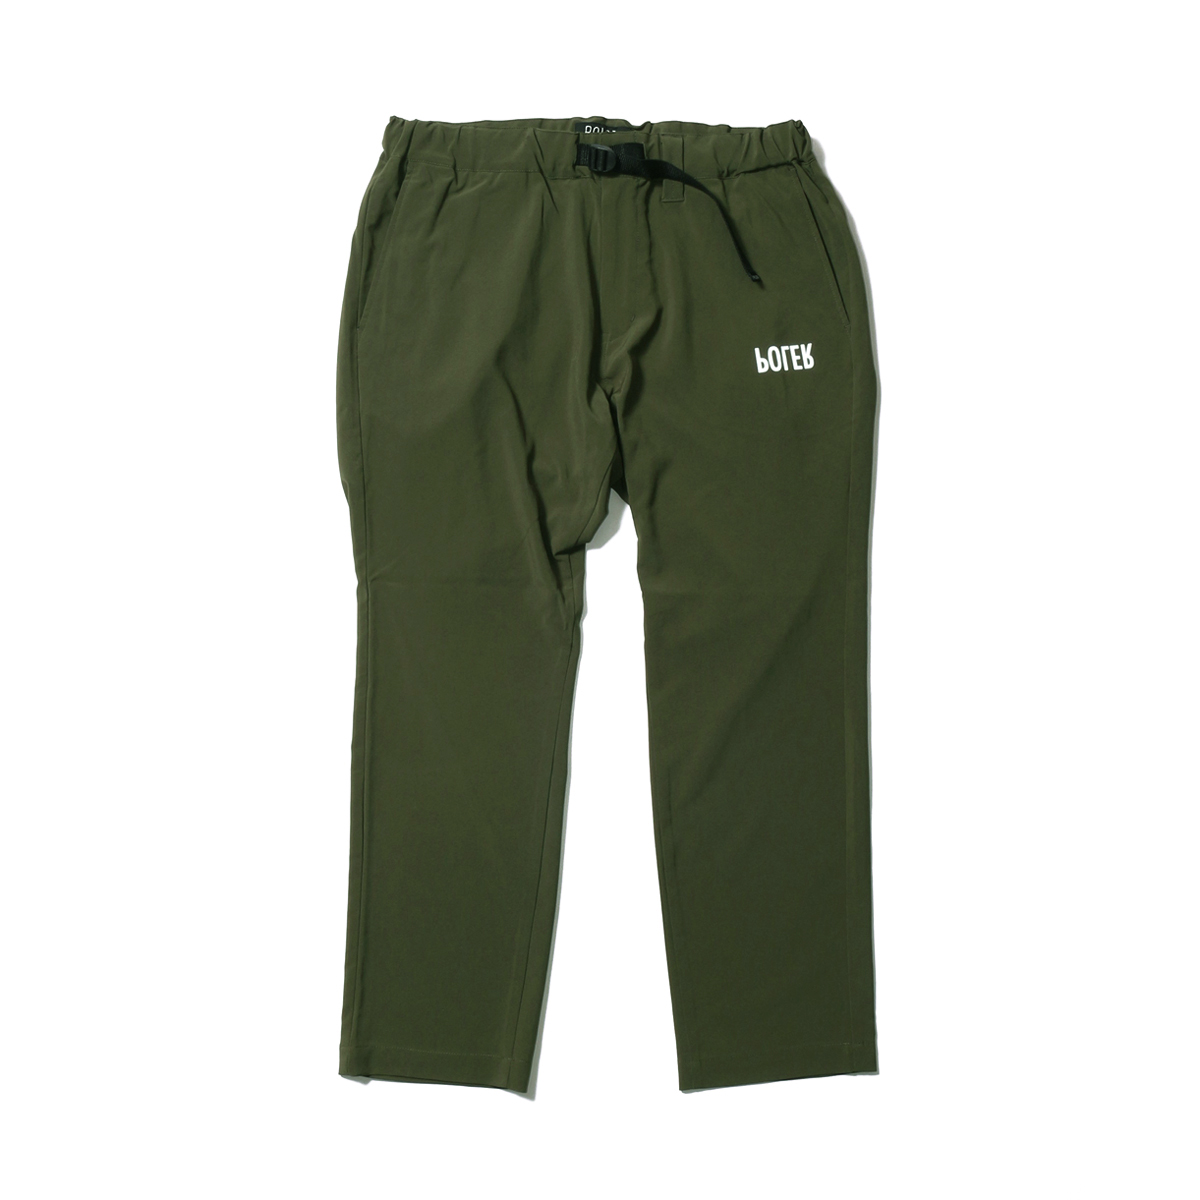 RELOP DRY FIT CLIMBING PANTS OLIVE